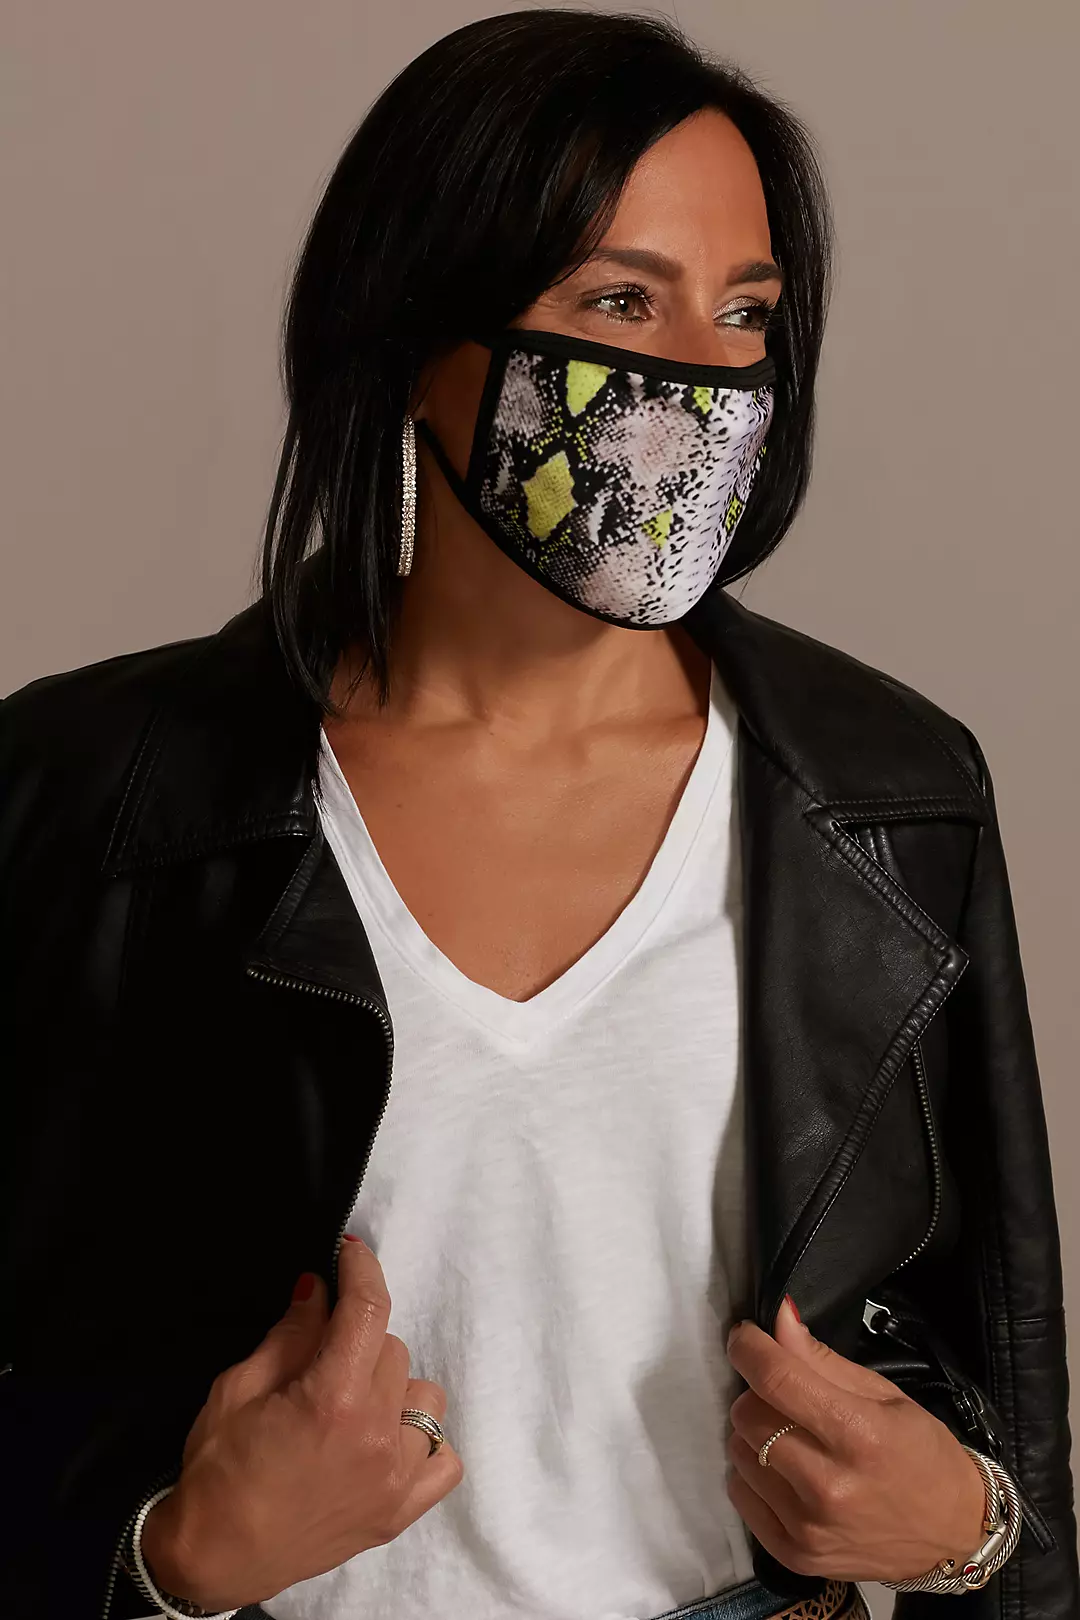 Snakeskin Face Mask with Neon Accents Image